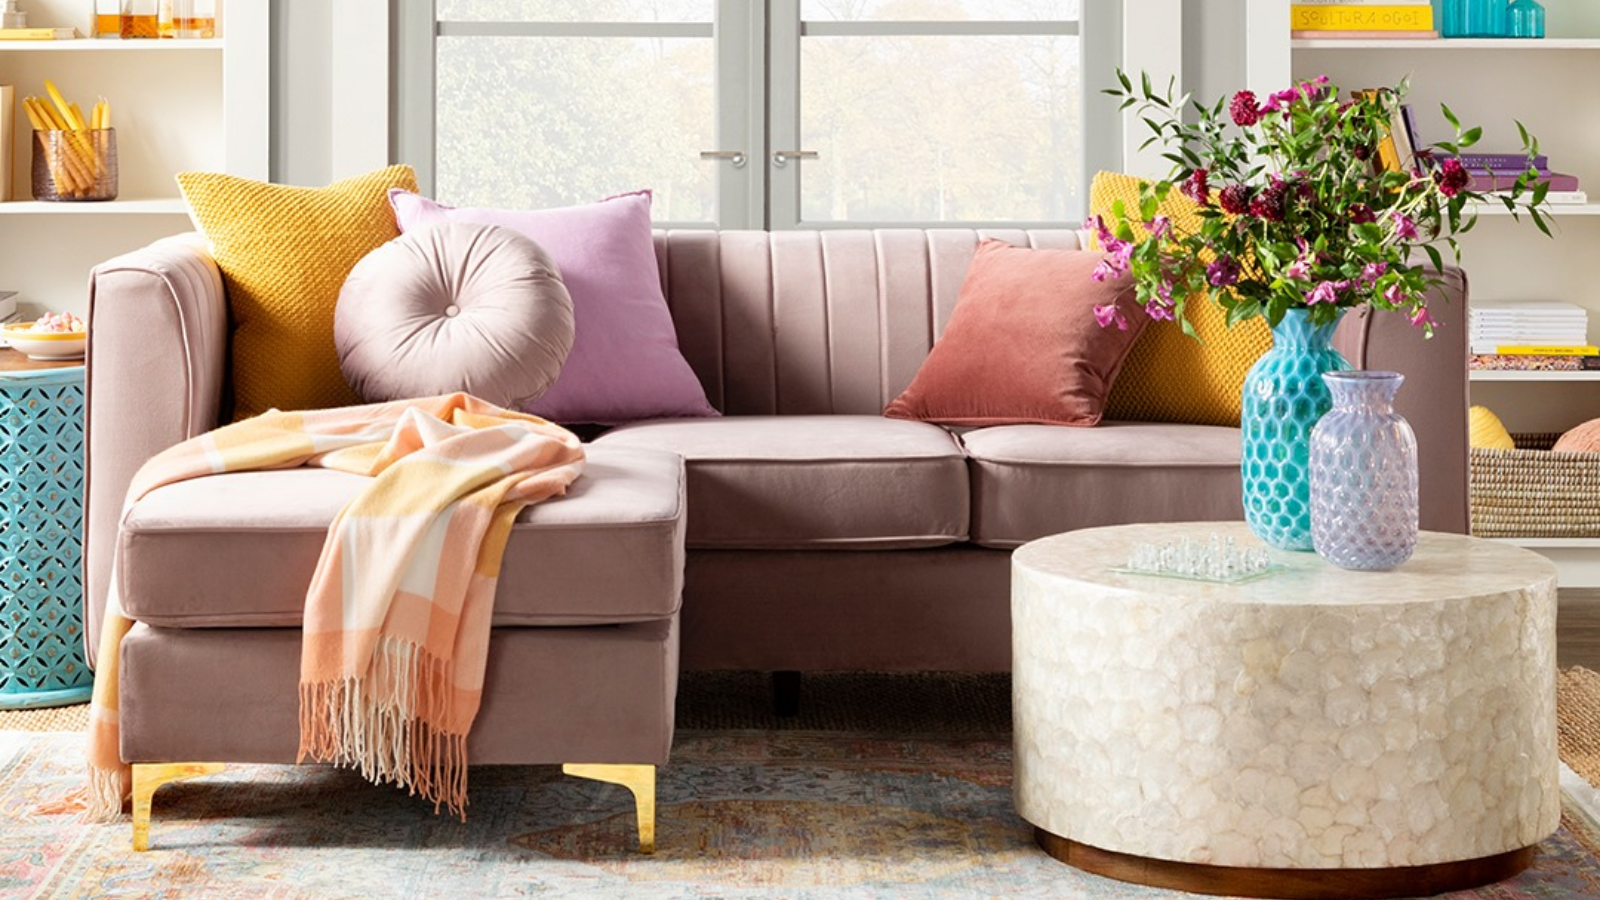 Wayfair MLK Day Sale Save Big On Top Rated Furniture And Home Decor